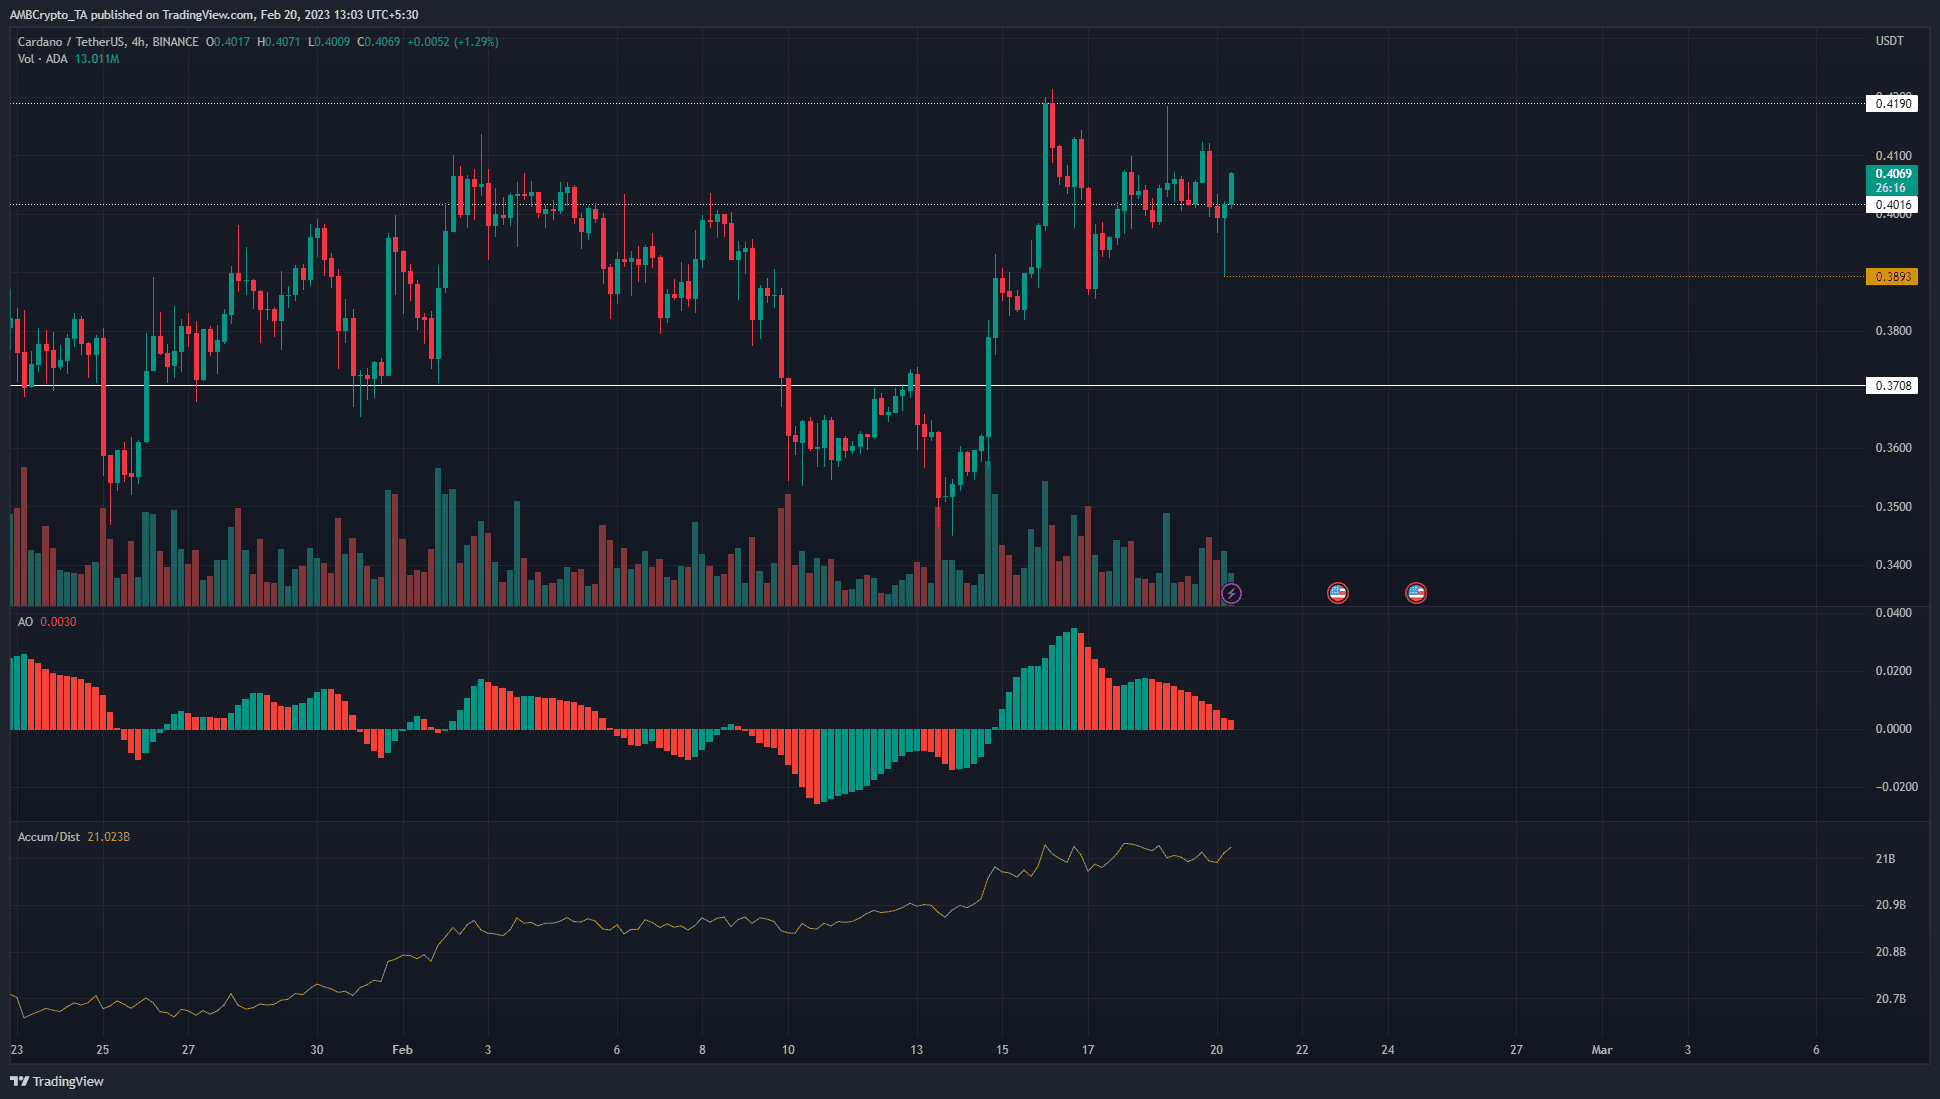 Cardano poised for further gains this week but buyers must wait for a retest